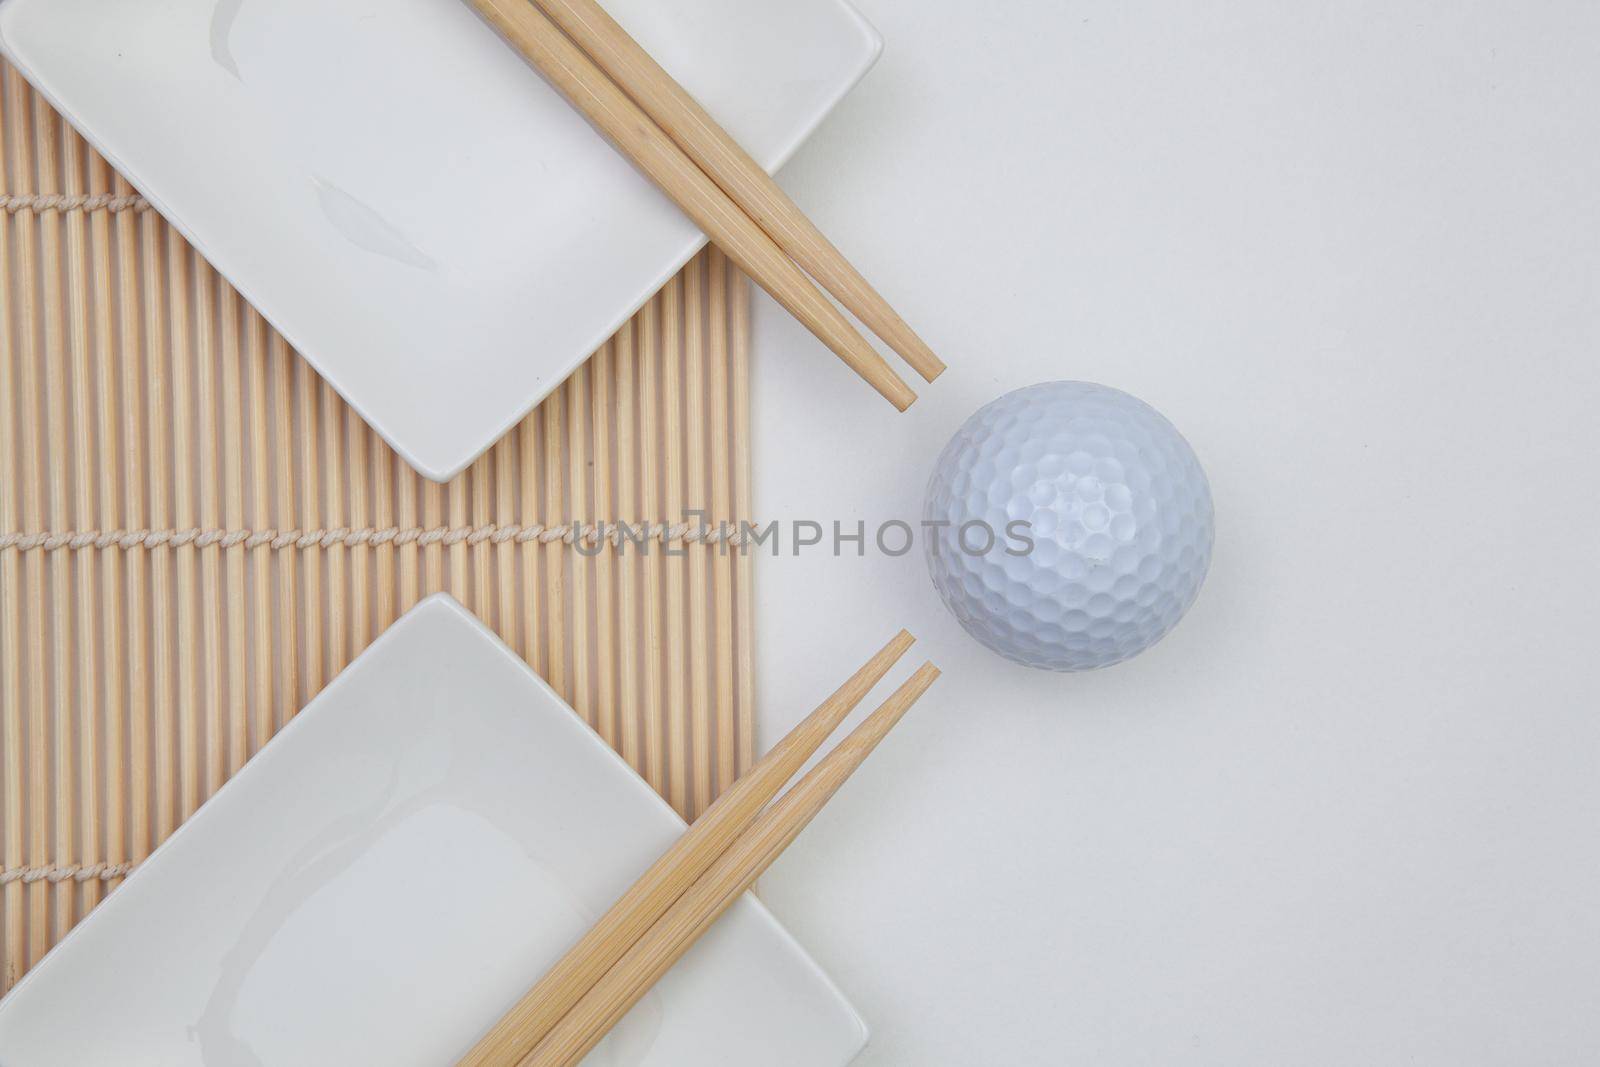 Top View Of White Empty Sushi Plates With Bamboo Chopsticks and Golf Ball. Golf  Design